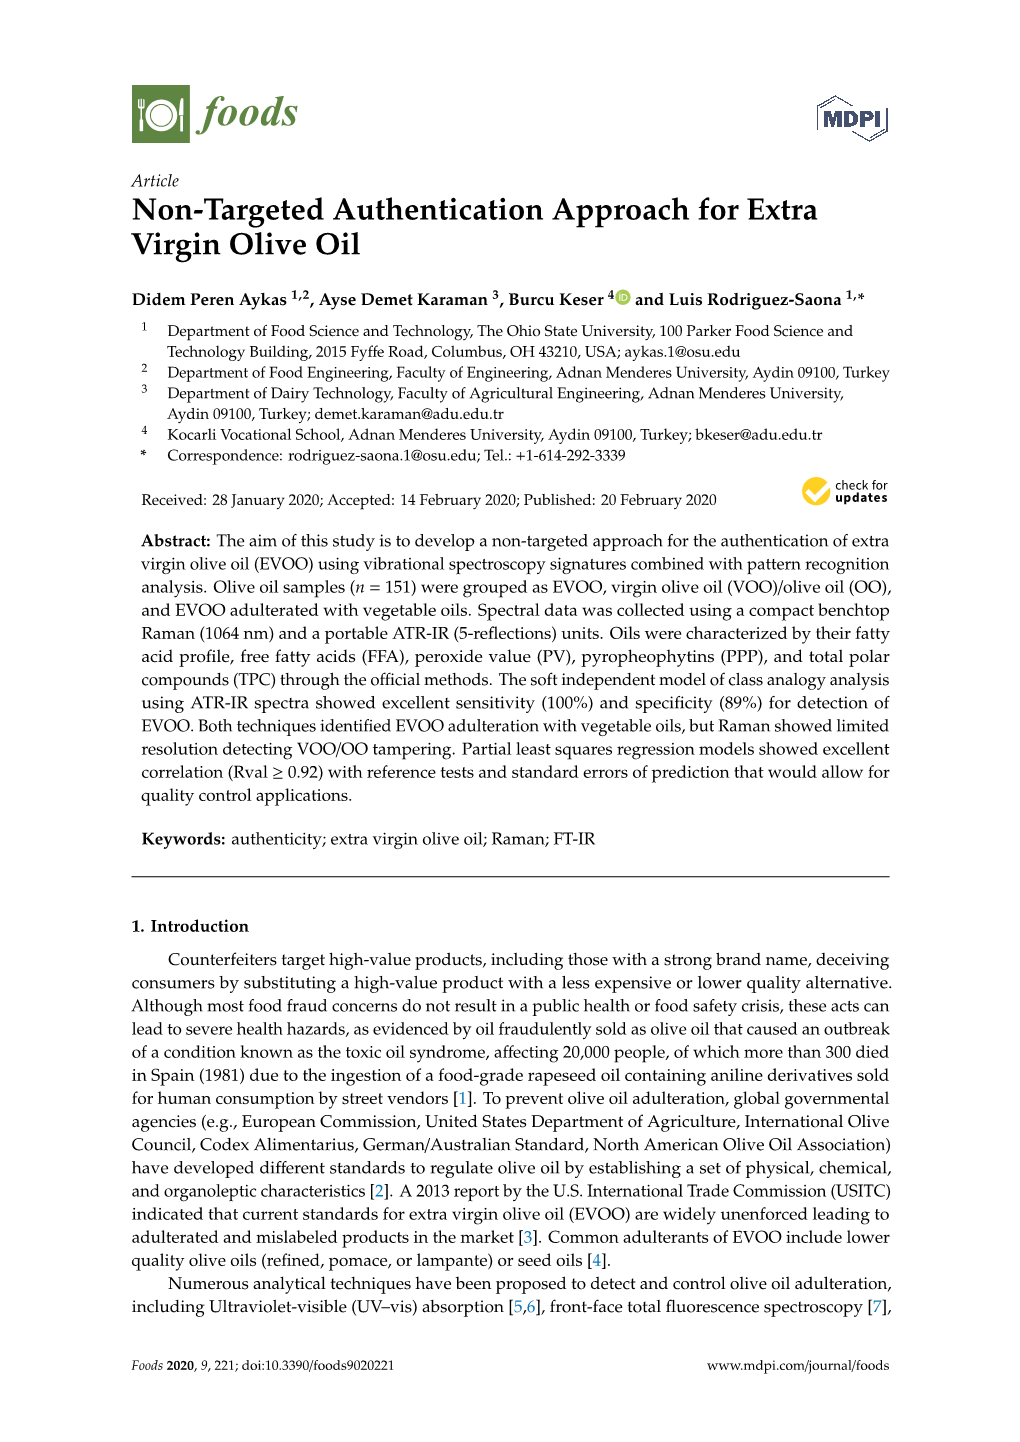 Non-Targeted Authentication Approach for Extra Virgin Olive Oil